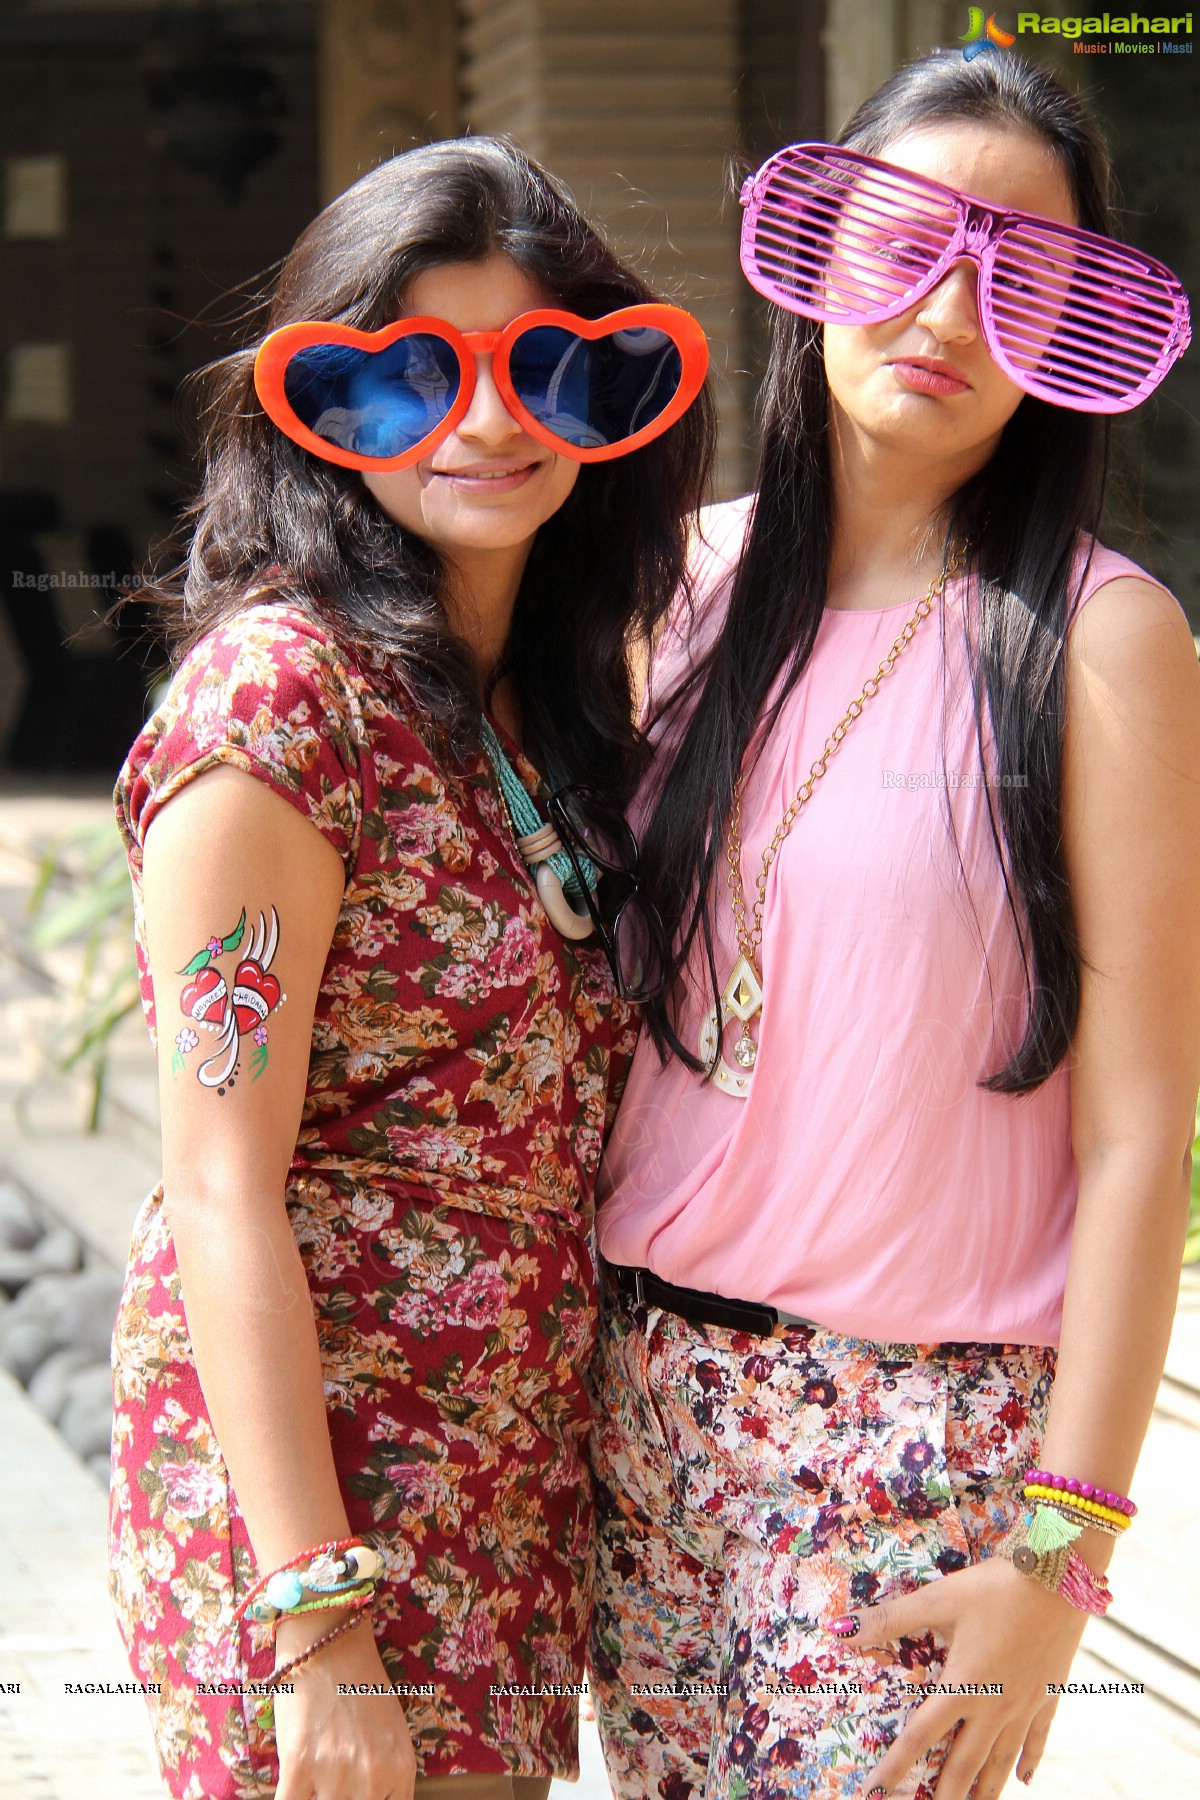 Hawaiian Pool Party at Marriot - Hosted by Jyothi & Sanchu